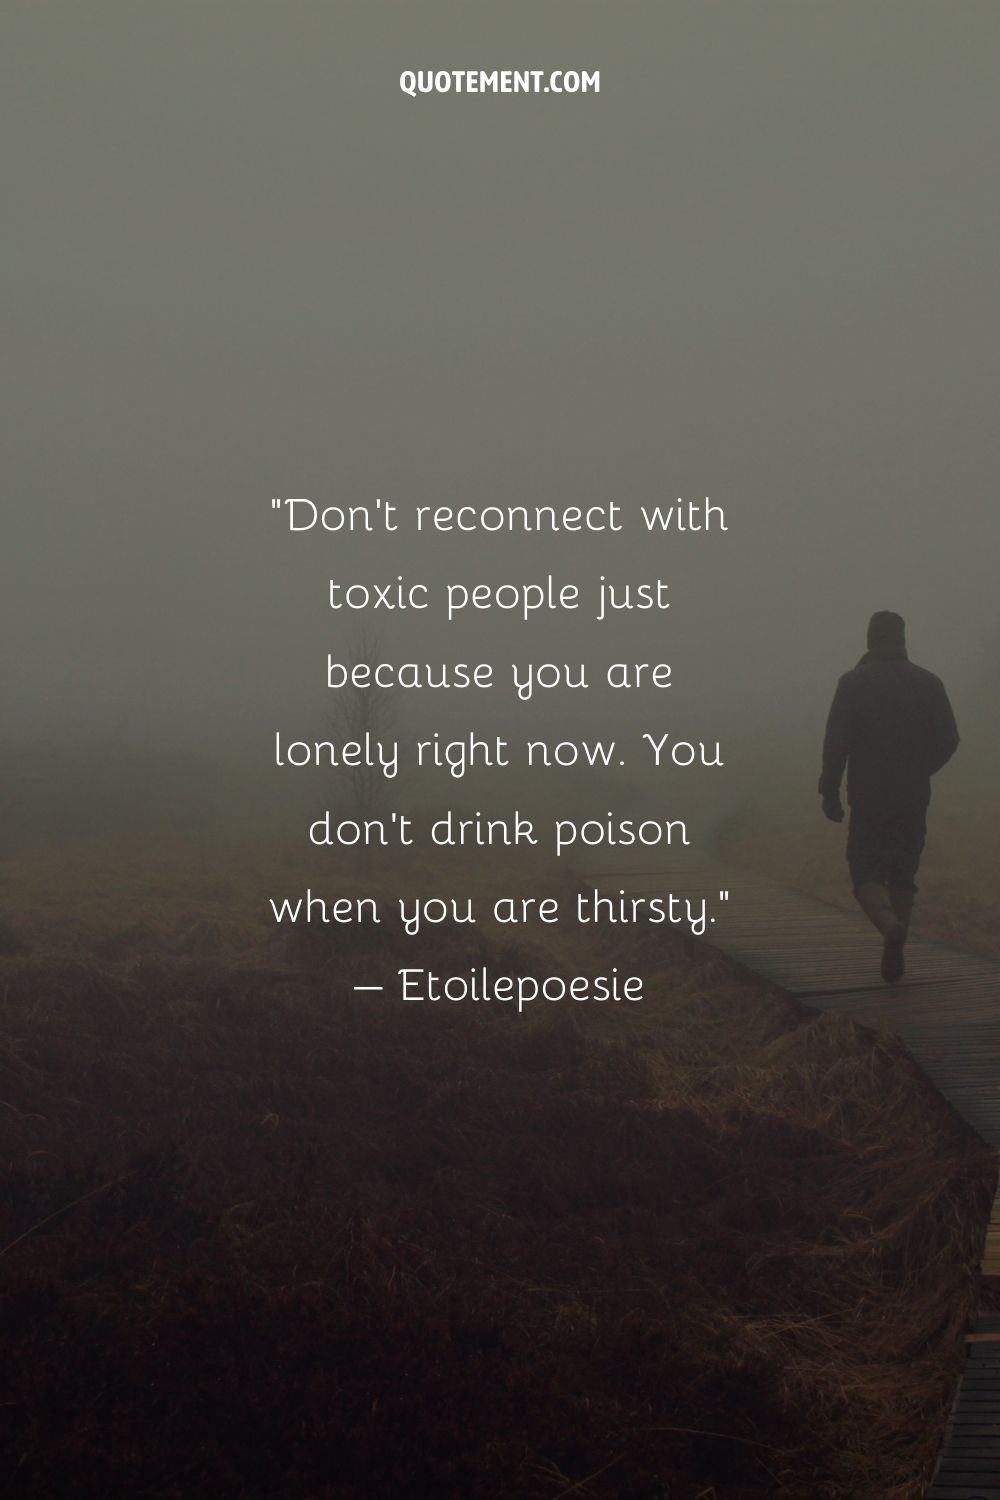 Don’t reconnect with toxic people just because you are lonely right now